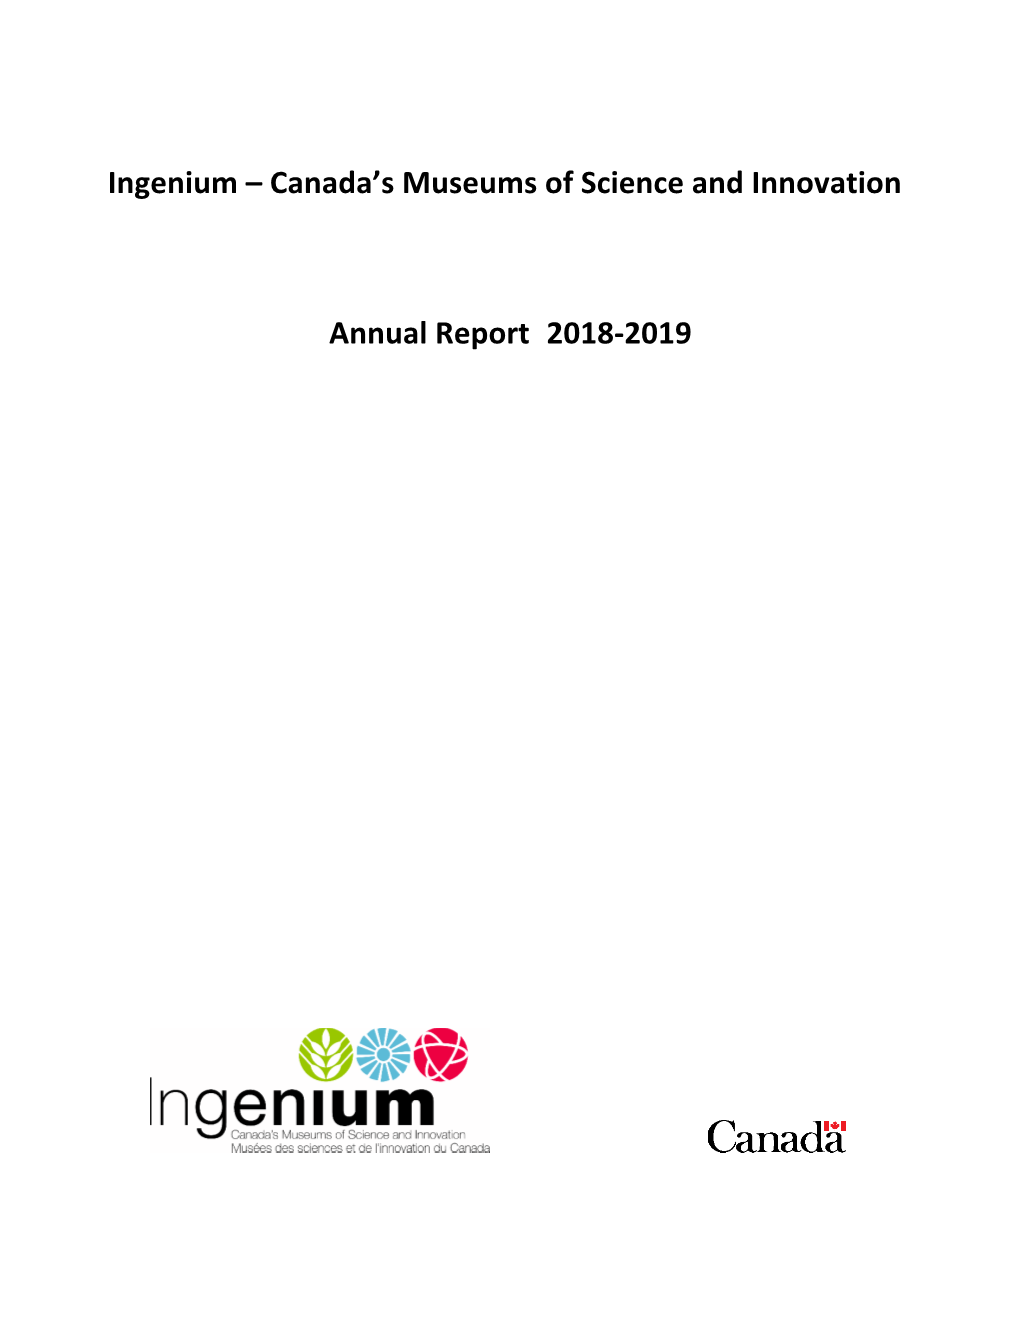 Canada's Museums of Science and Innovation Annual